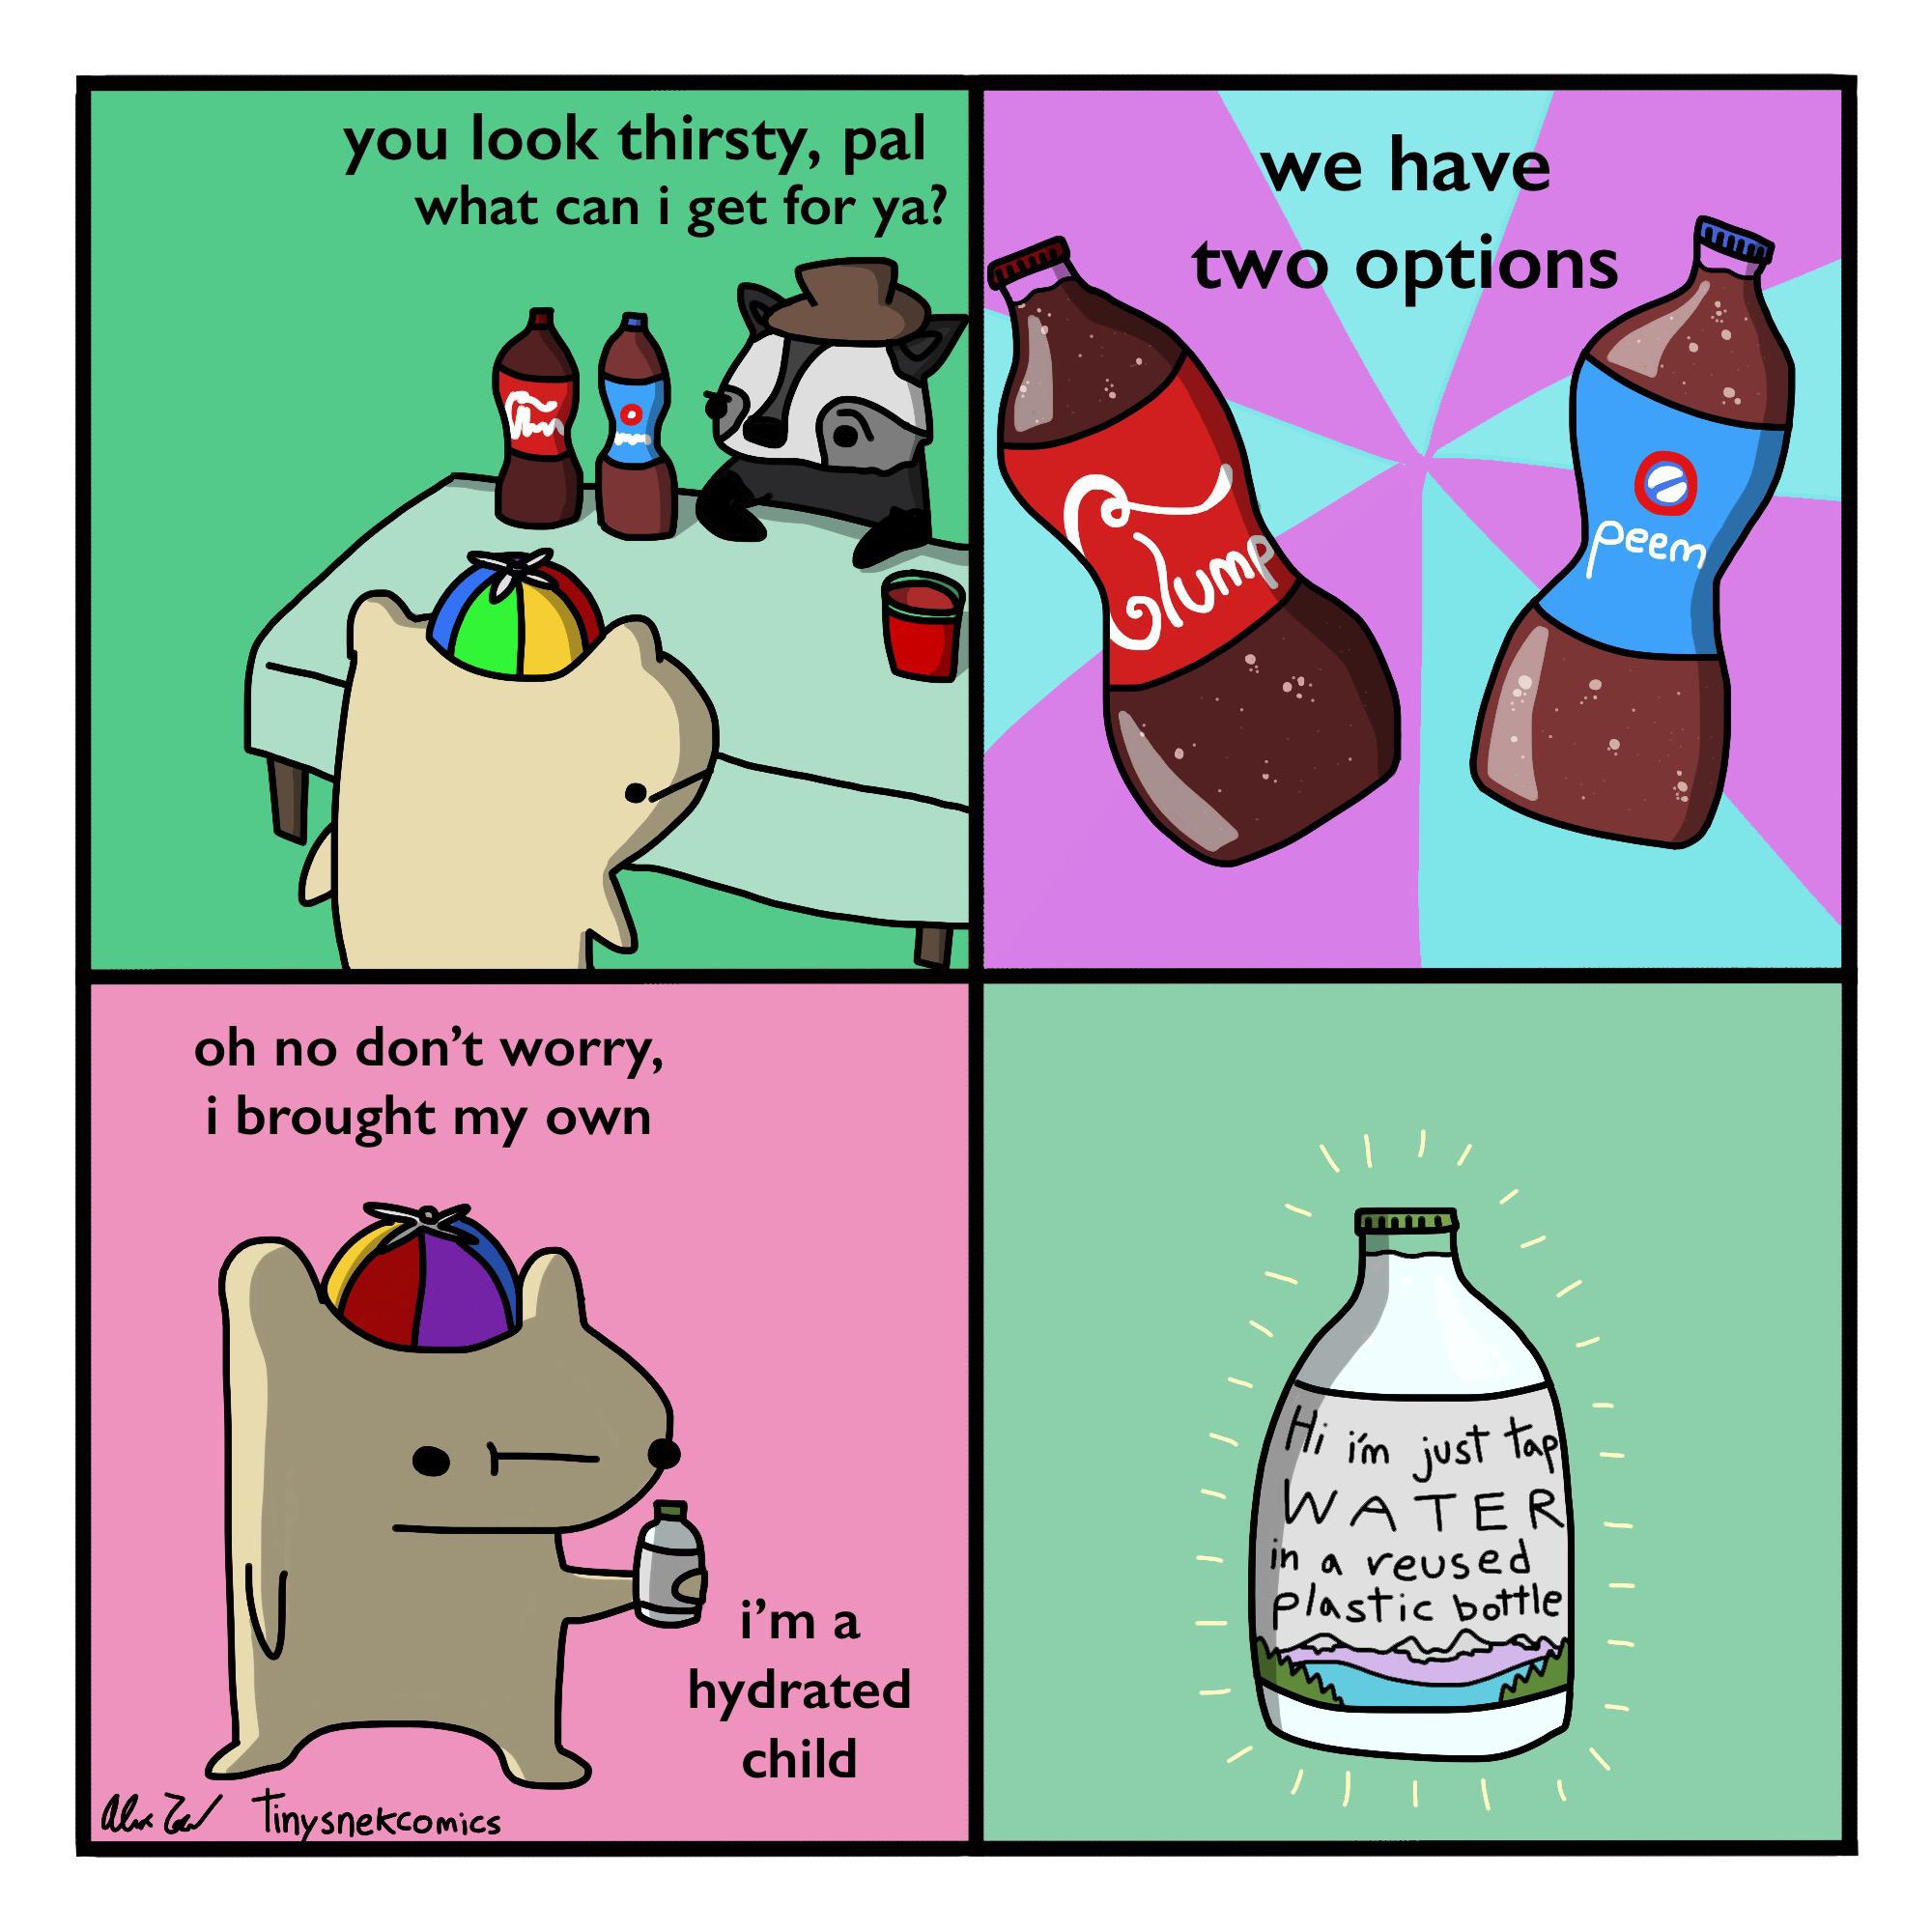 comics comics comics text: you look thirsty, pal what can i get for ya? o oh no don't worry, i brought my own i'm a hydrated child fin snekcomics we have two options jn reused plnstic bottle 